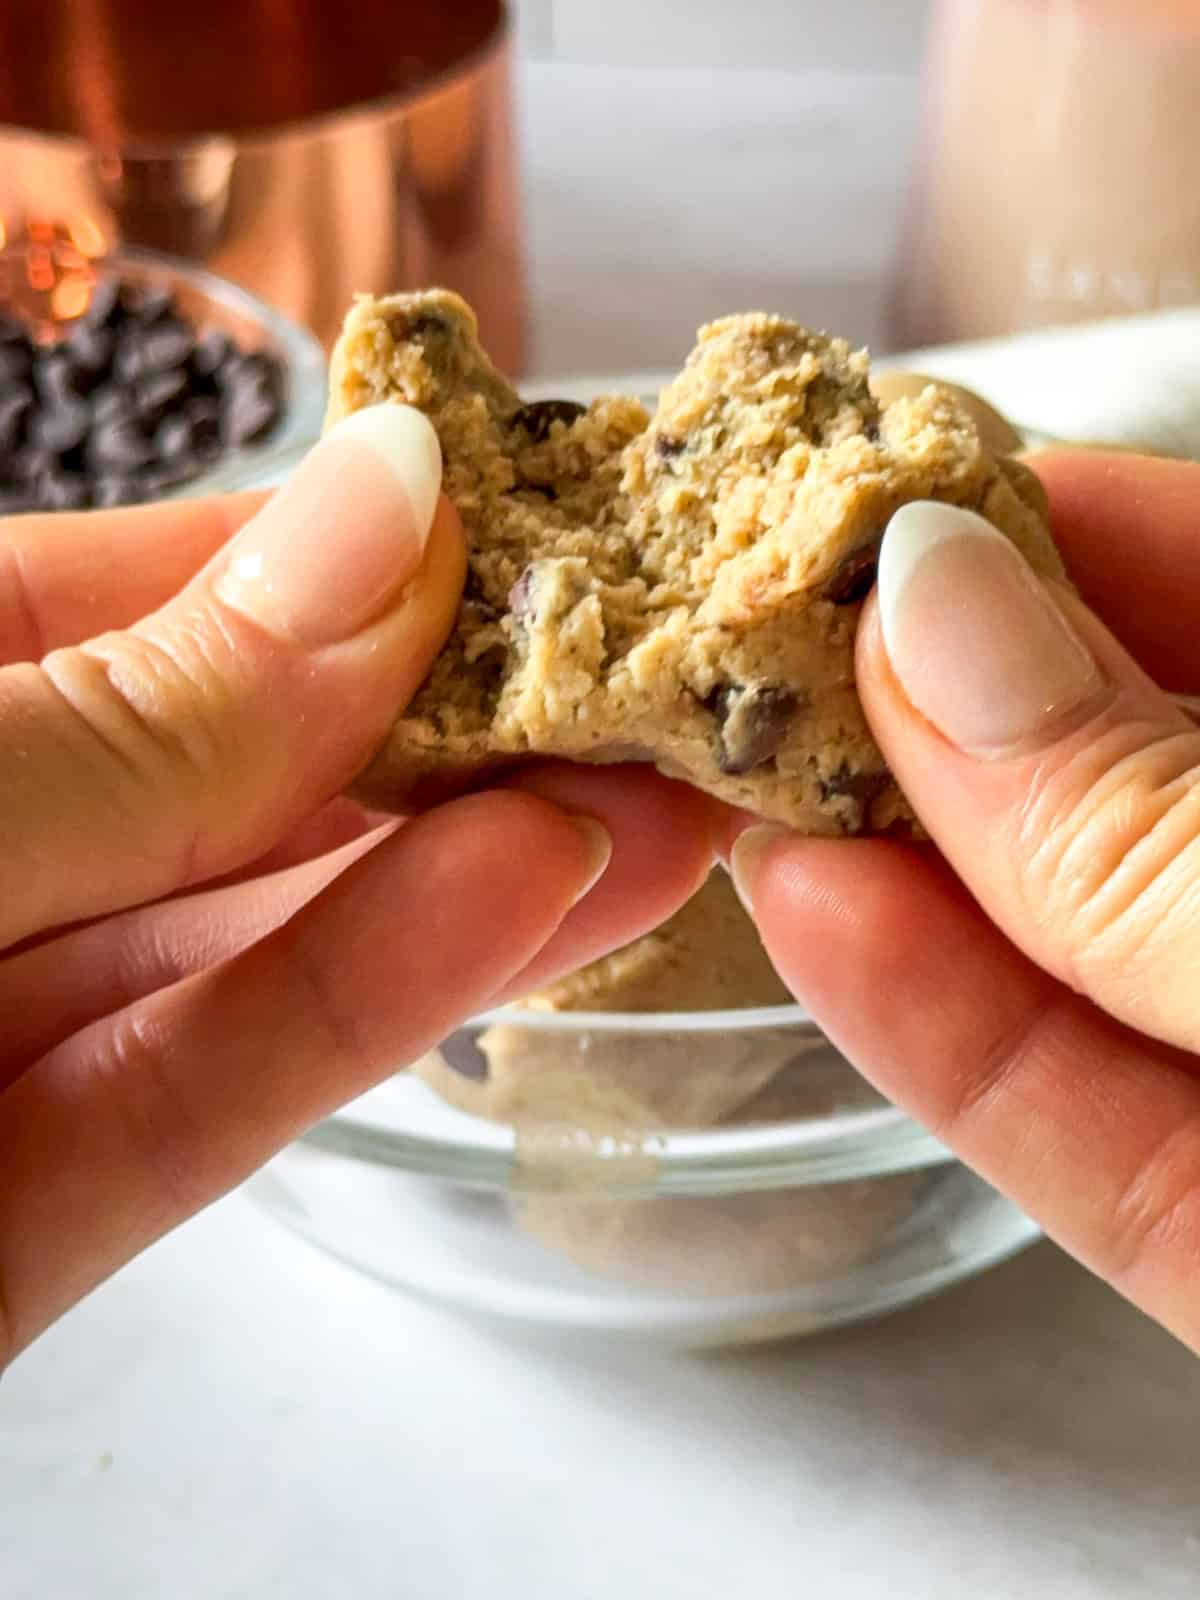 A human hand holding a protein cookie dough bite and tearing it apart to show the gooey center.